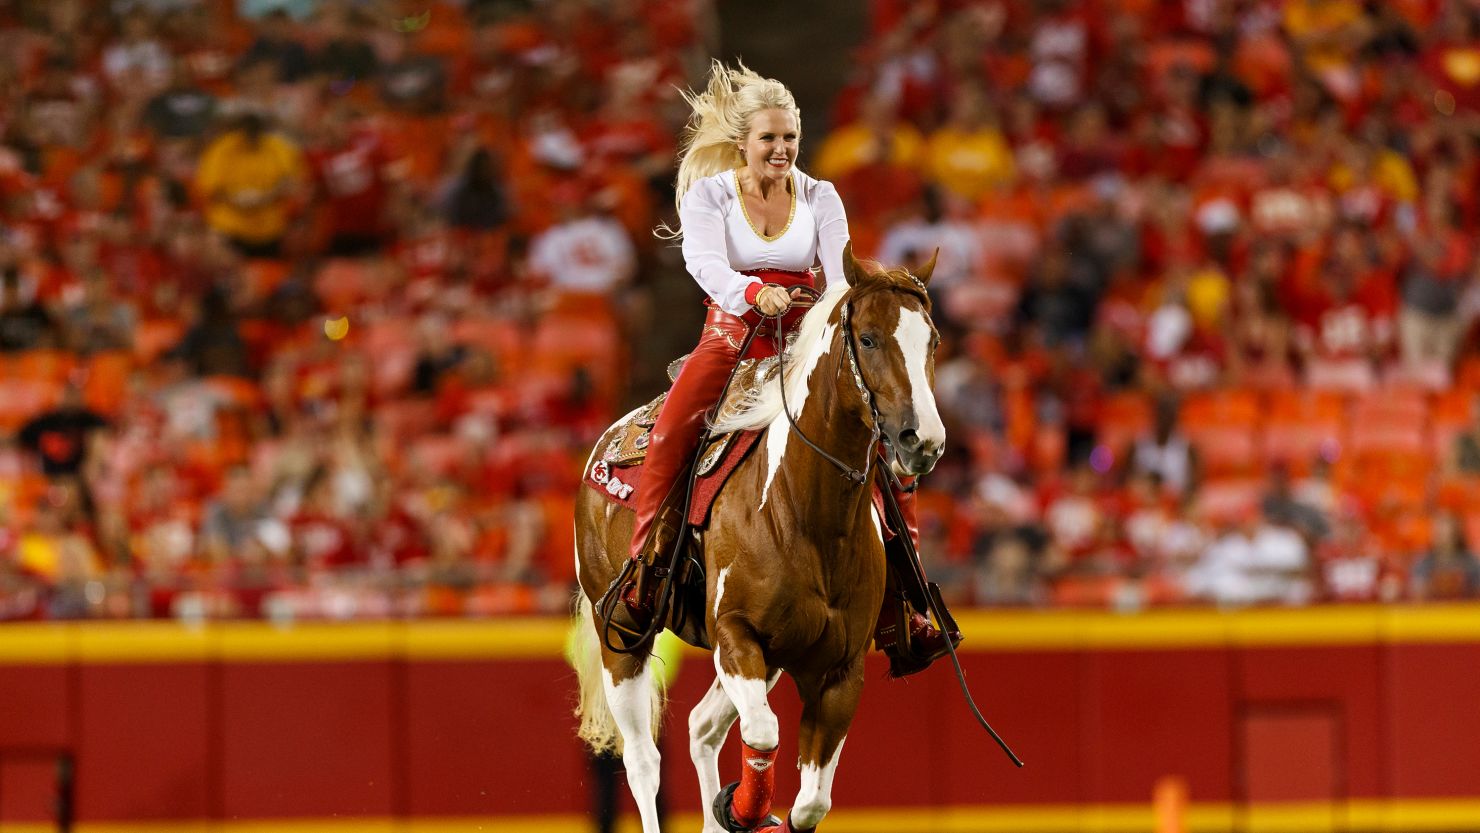 In this 2019 photo, Chiefs mascot Warpaint gallops around the field after the team scored a touchdown during a preseason game.